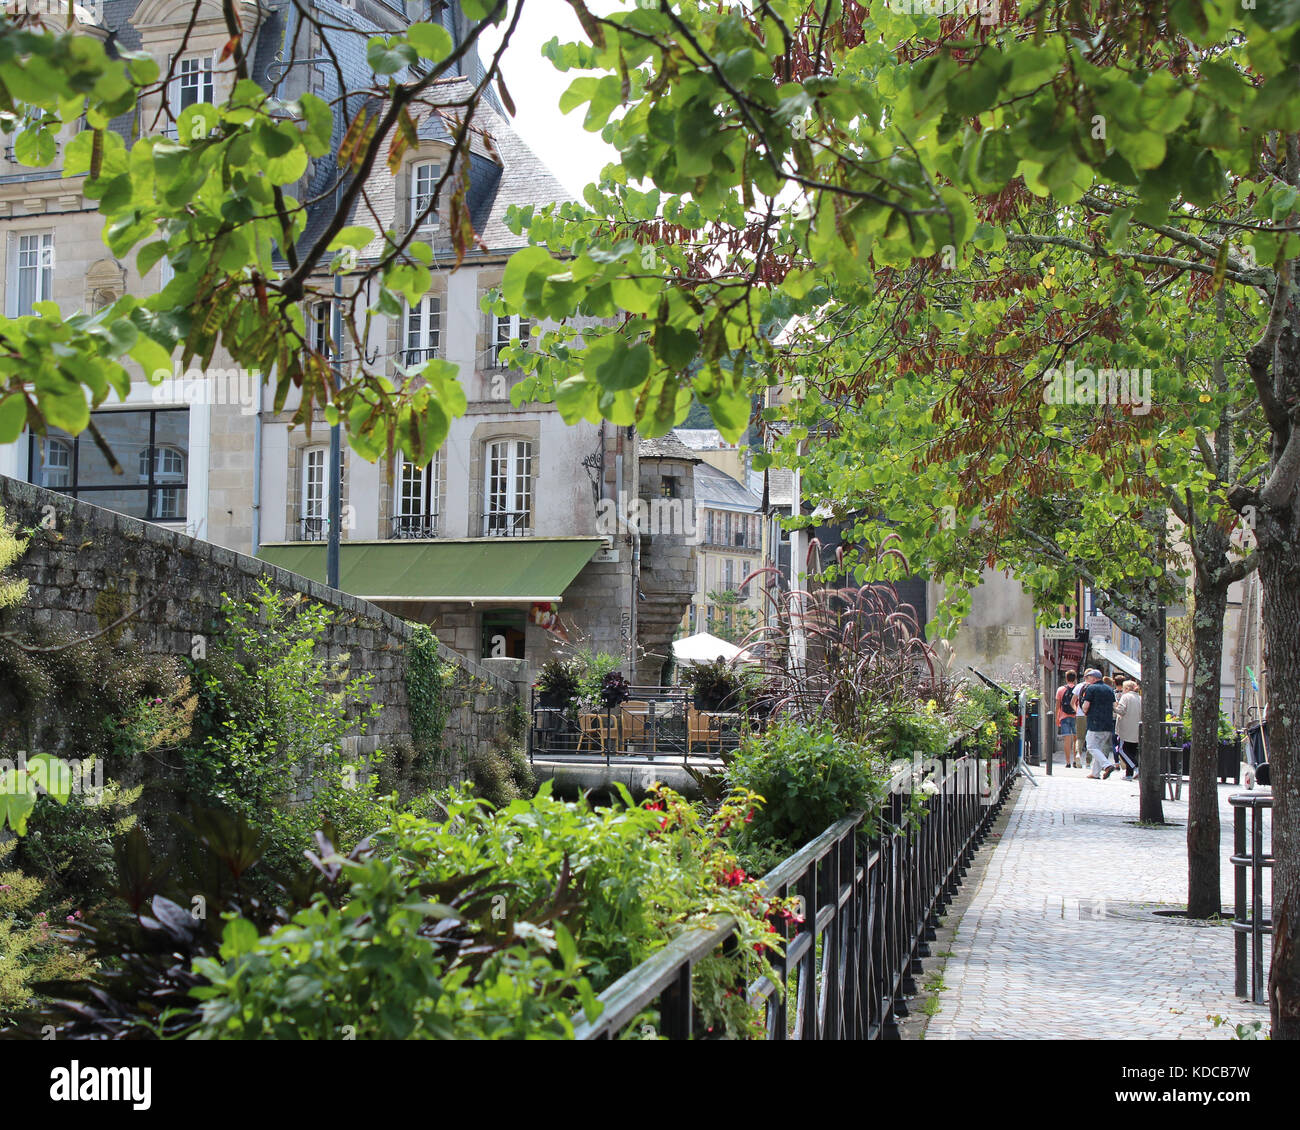 QUIMPER, FRANCE, JULY 25 2017: The leafy streets of the old town of Quimper in Brittany. Quimper is a popular tourist destination, Stock Photo